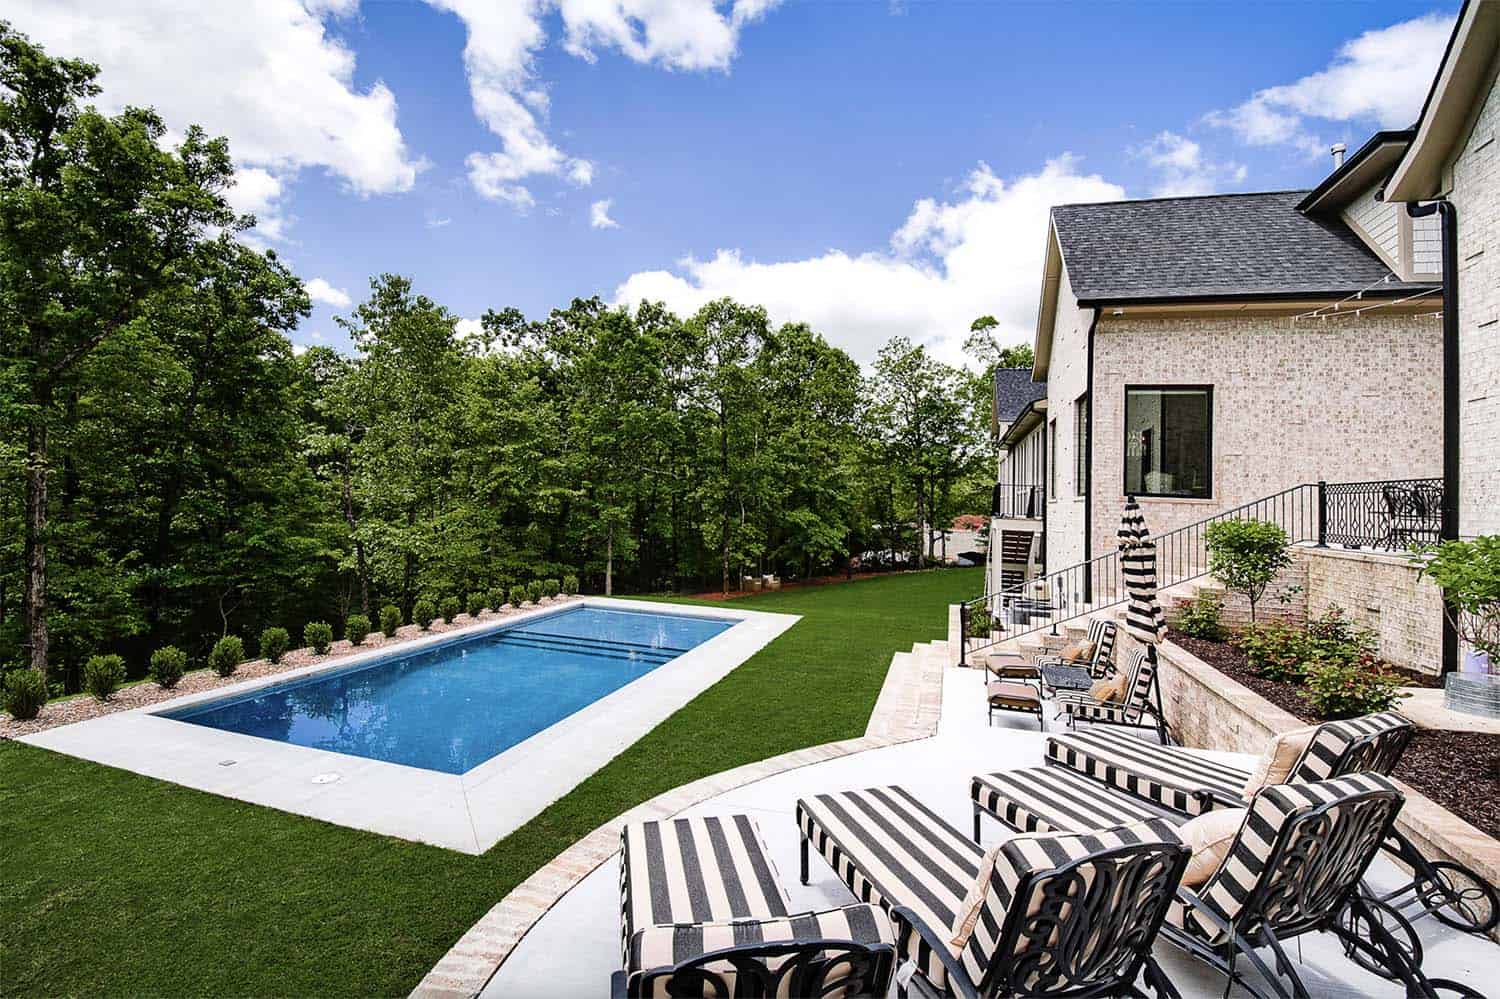 transitional style home exterior with a pool in the backyard